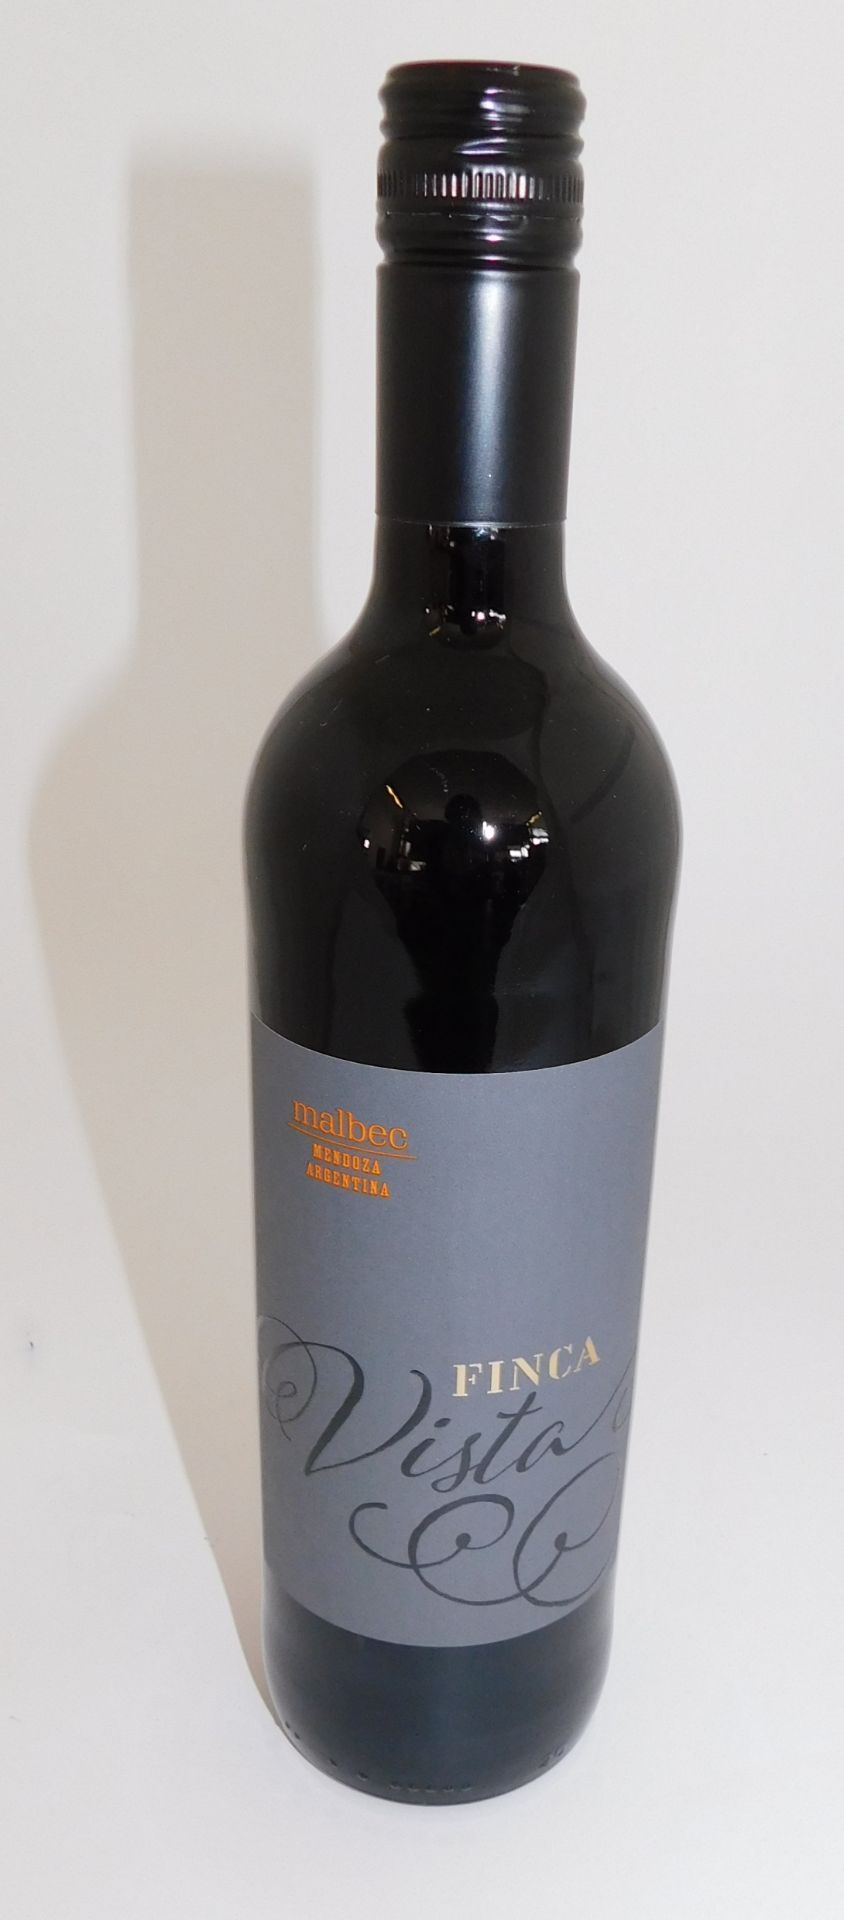 24 Bottles of Finca Vista Malbec, 75cl (Located Stockport – See General Notes for More Details)